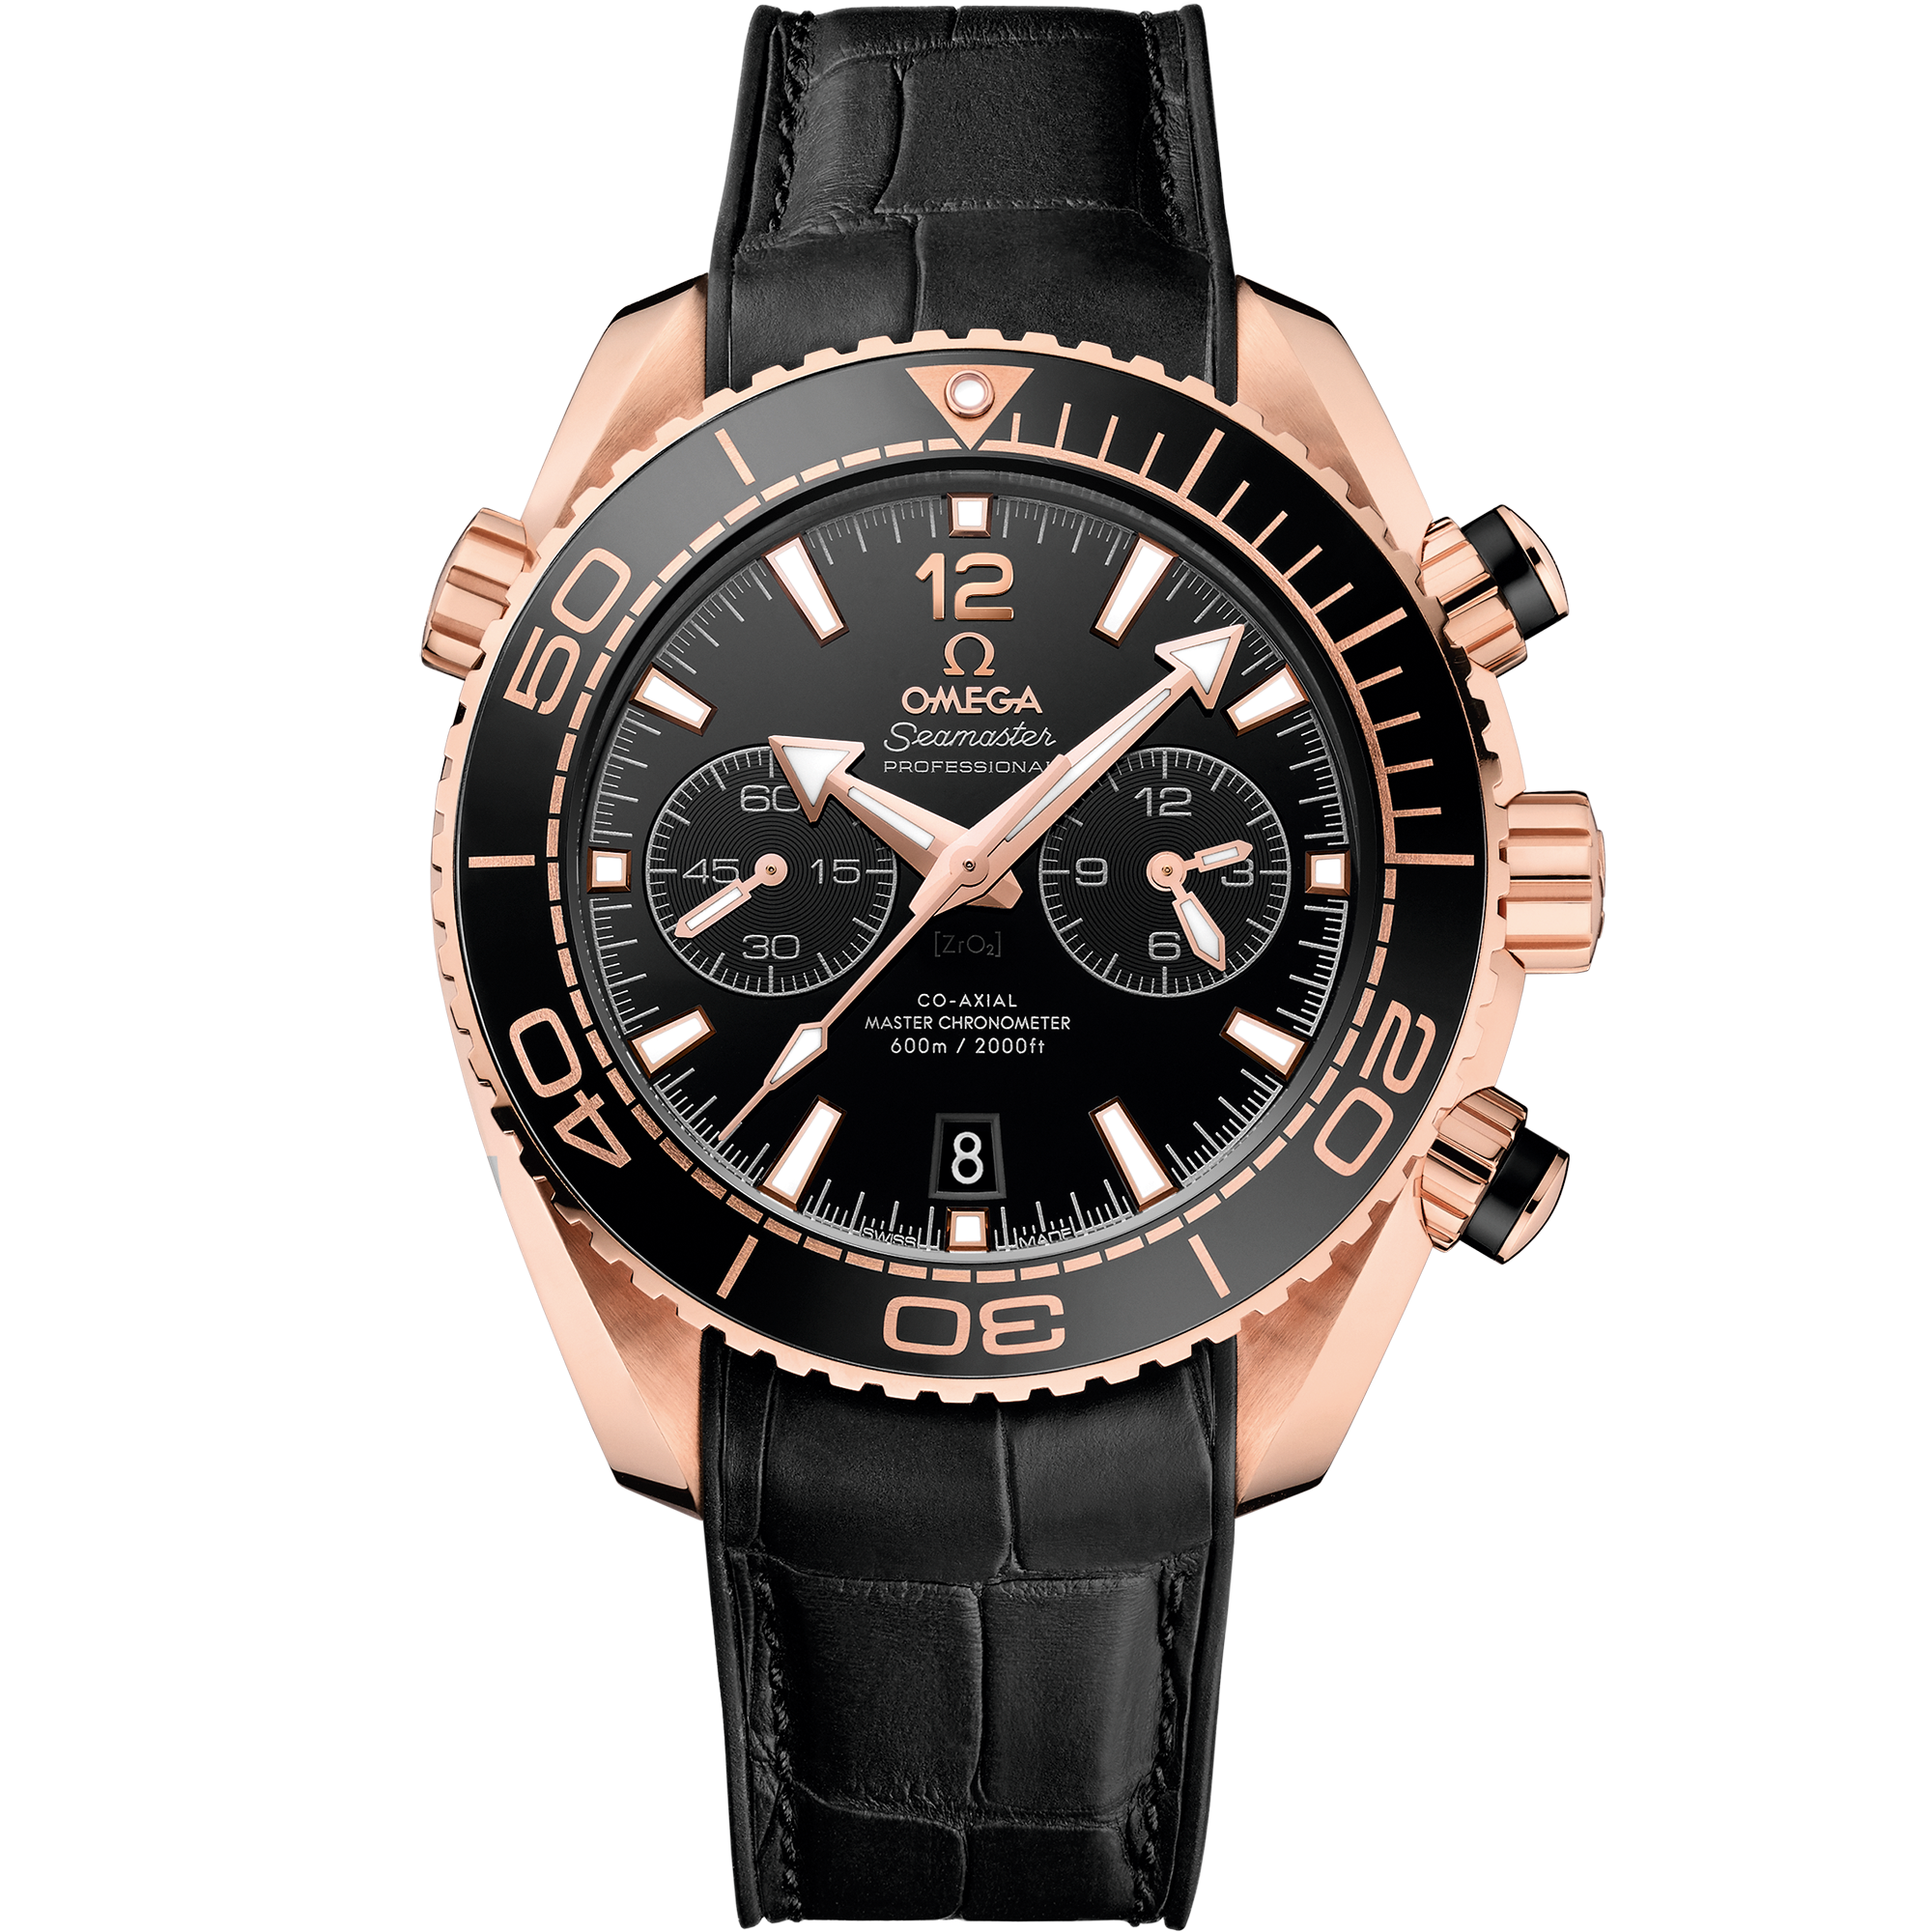 Seamaster 45.5 mm, Sedna™ gold on leather strap with rubber lining - 215.63.46.51.01.001